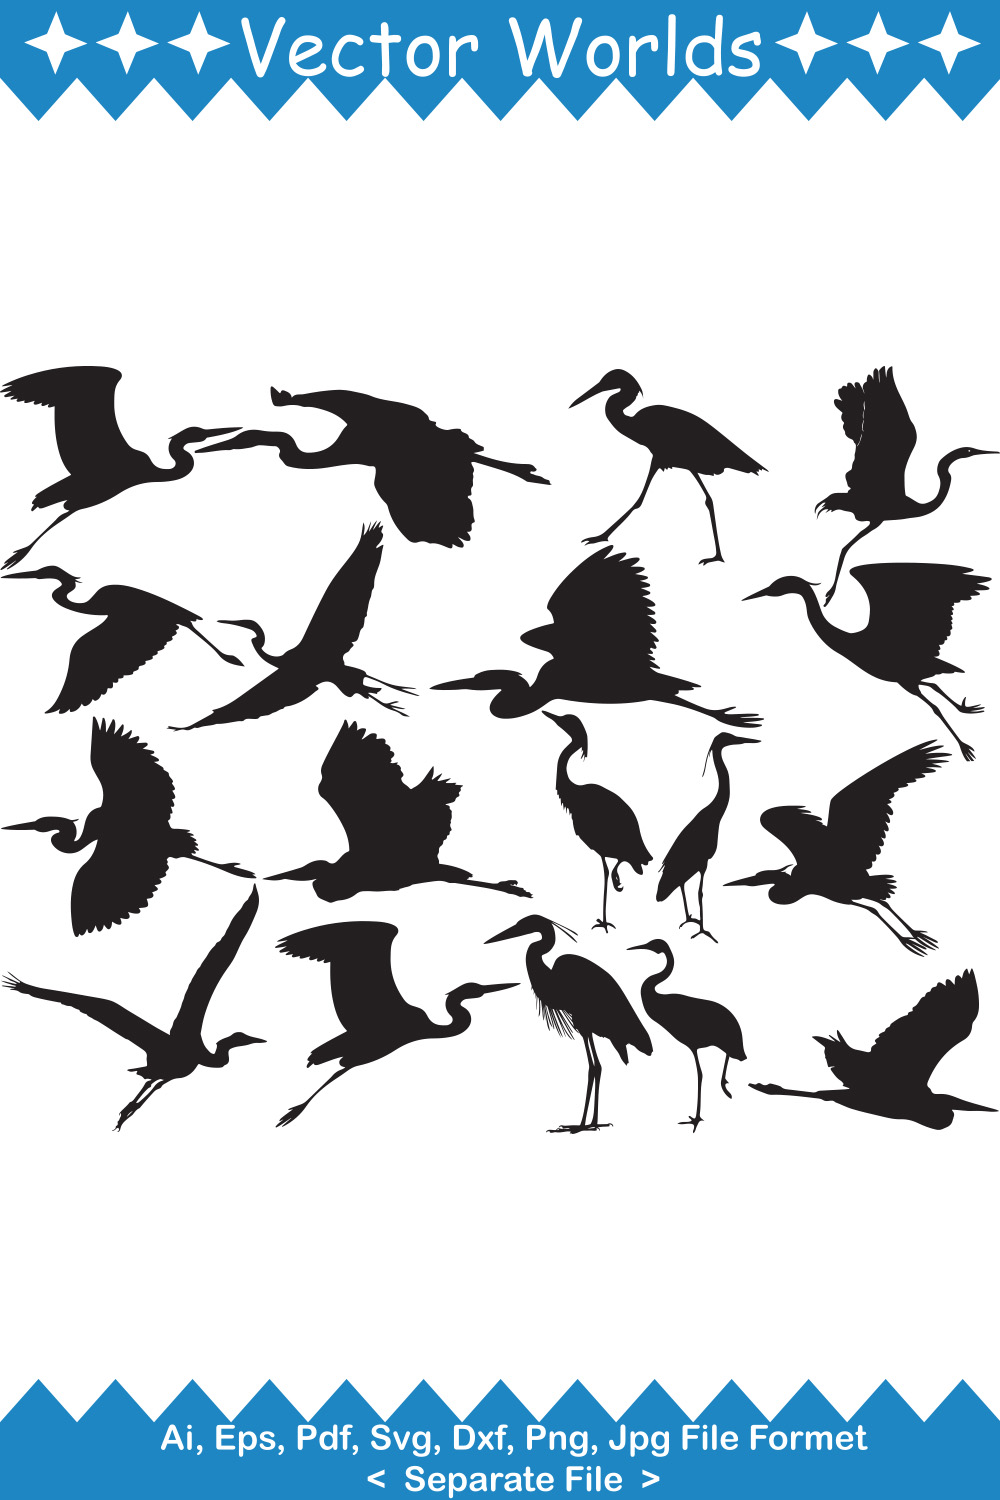 Flock of birds flying over a white background.